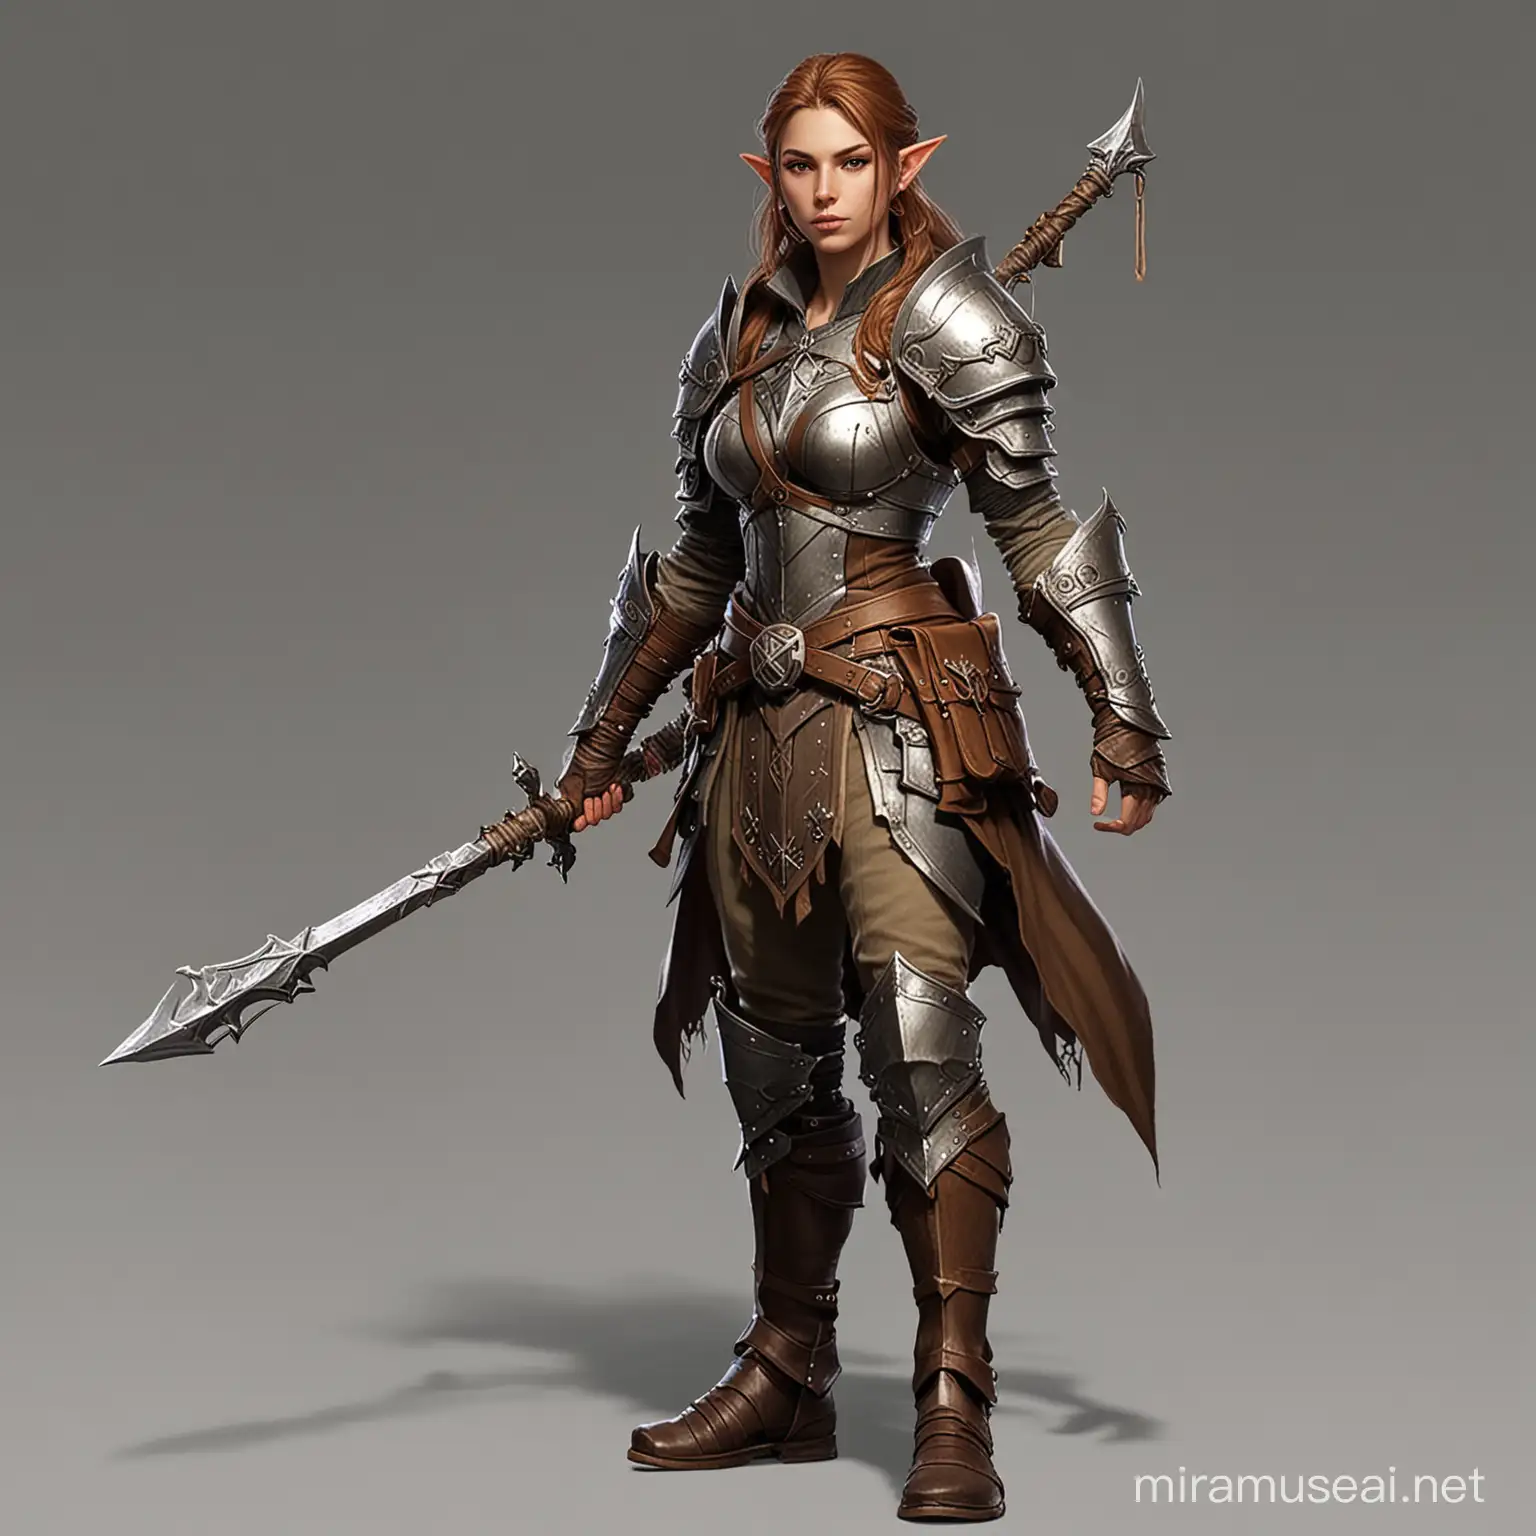 DND 5e Half elf with brown hair in an ready stance with a long staff and heavy armor